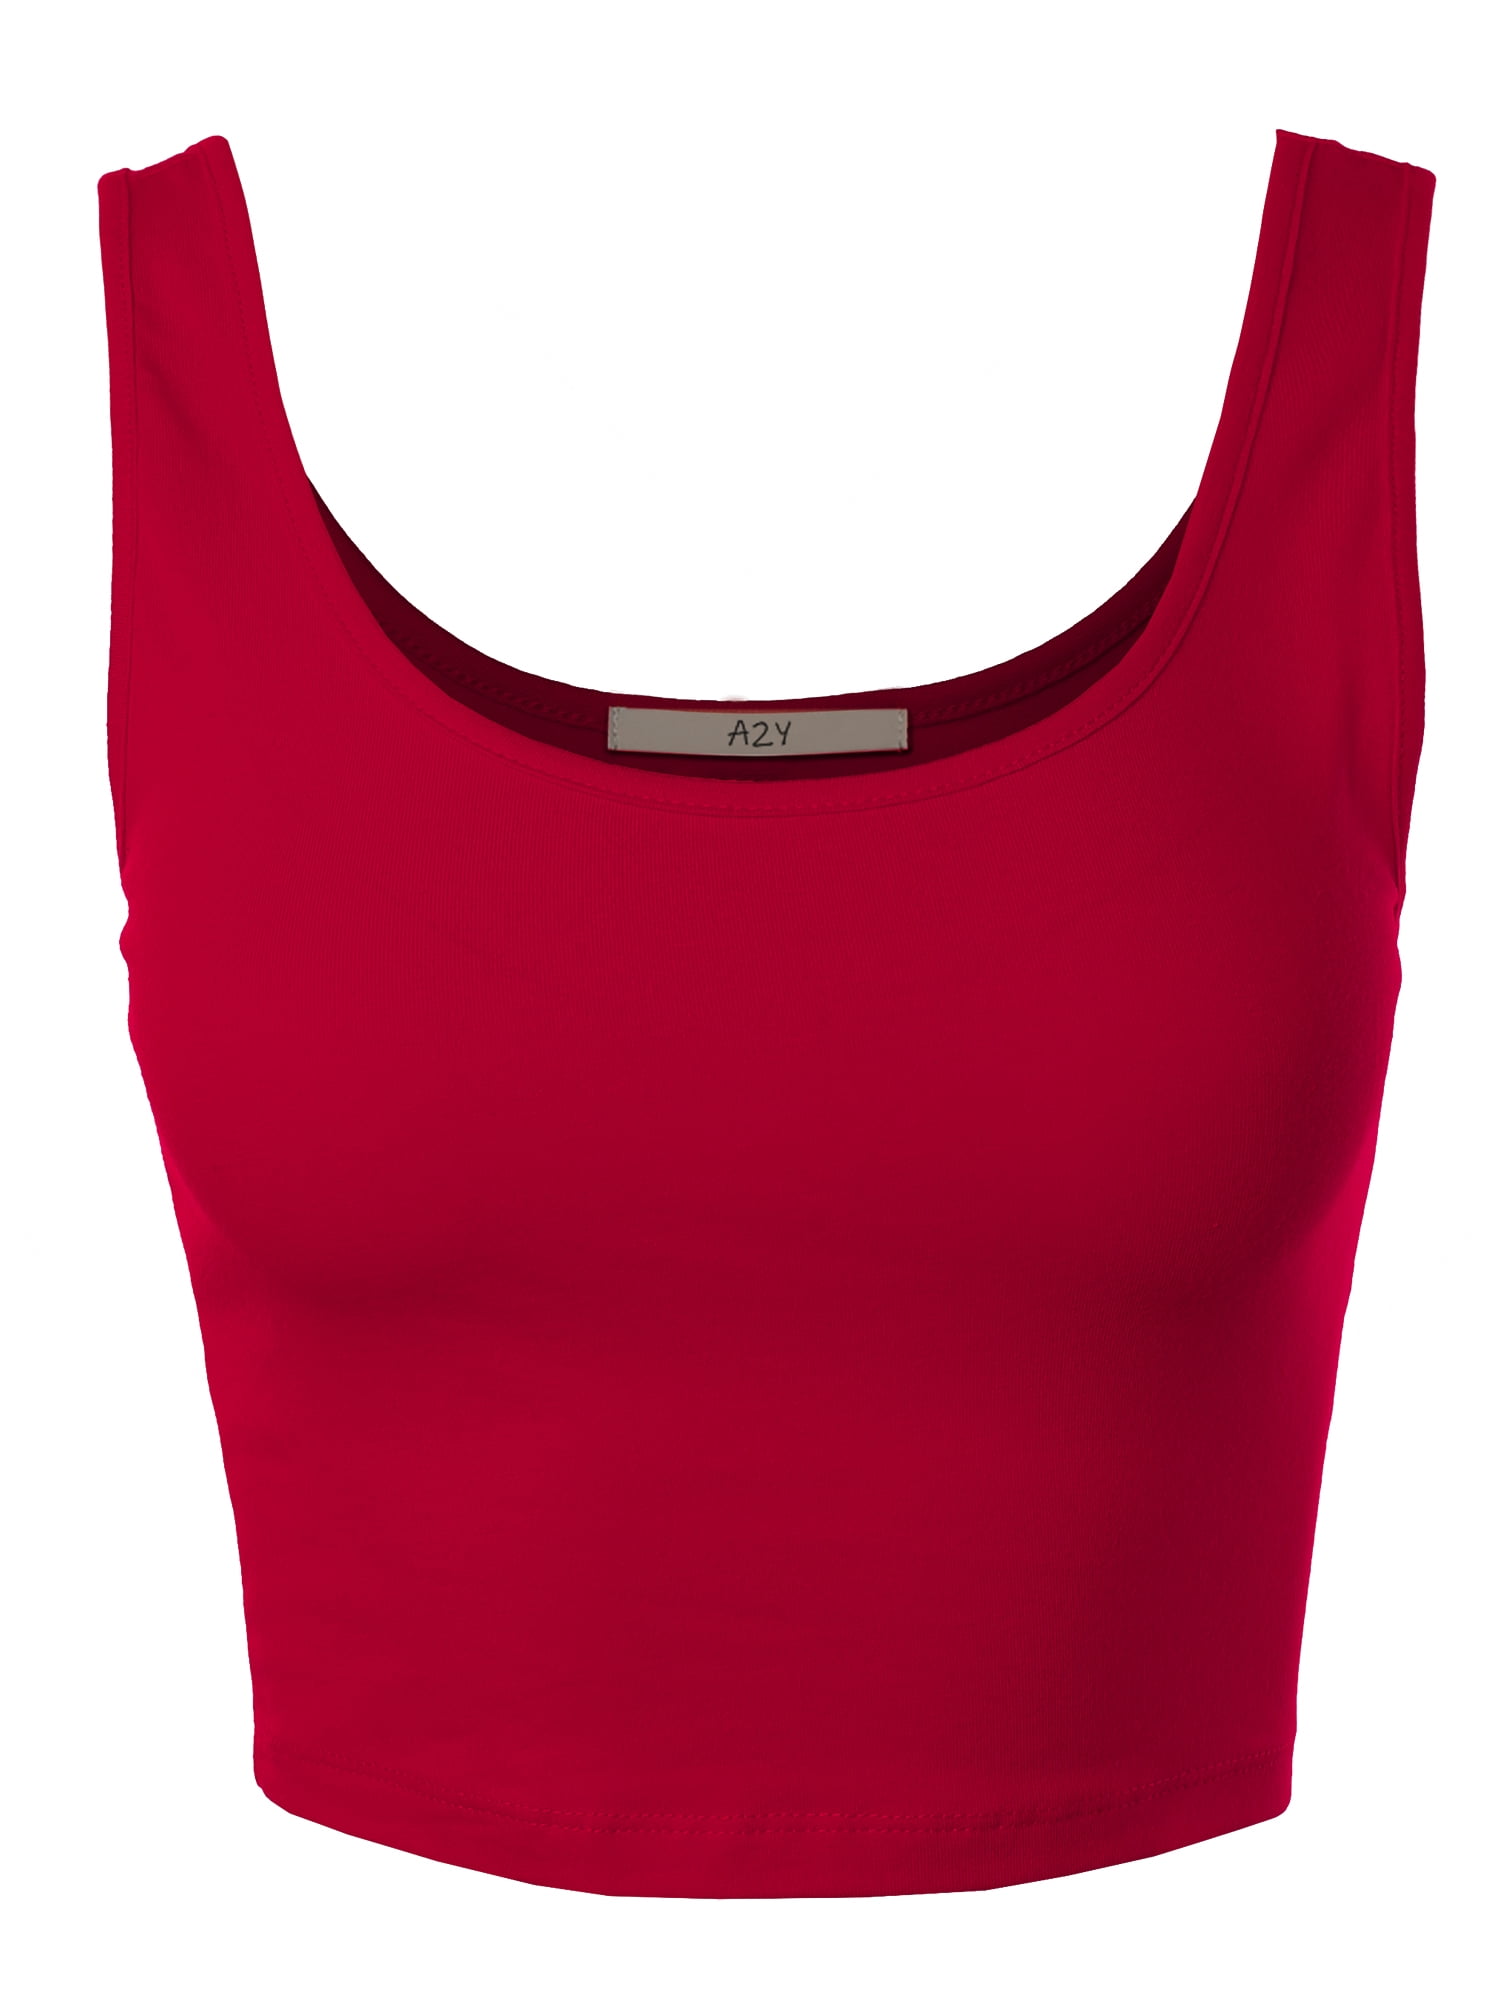 A2Y Women's Fitted Cotton Scoop Neck Sleeveless Crop Tank Top Magenta L 